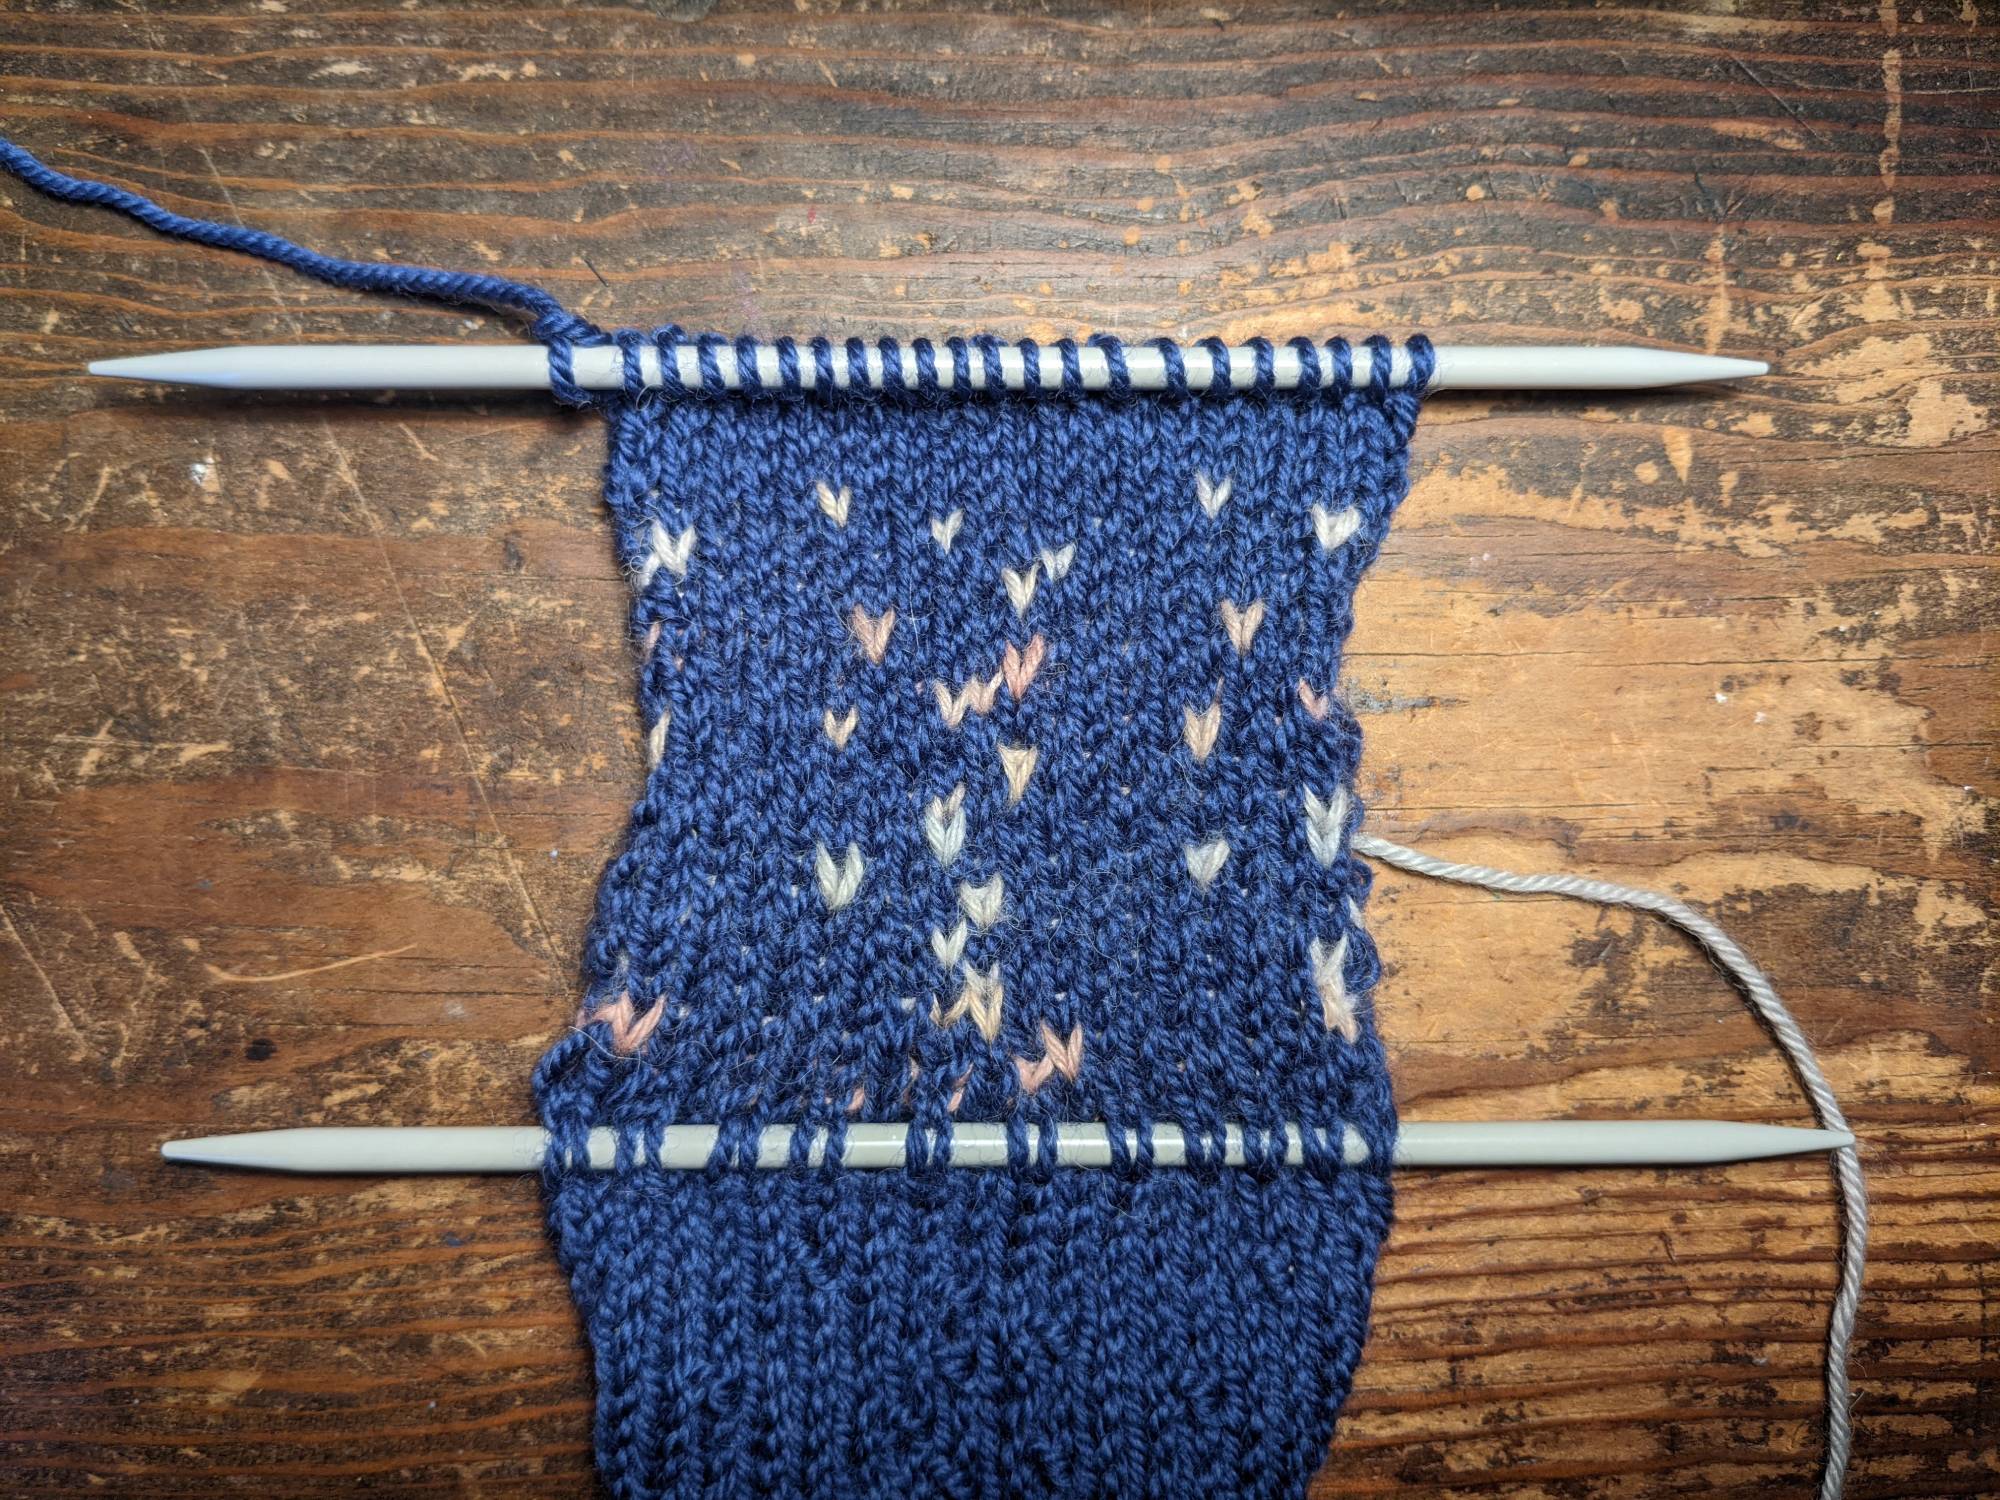 Spies once used knitting to send coded messages—and so can you